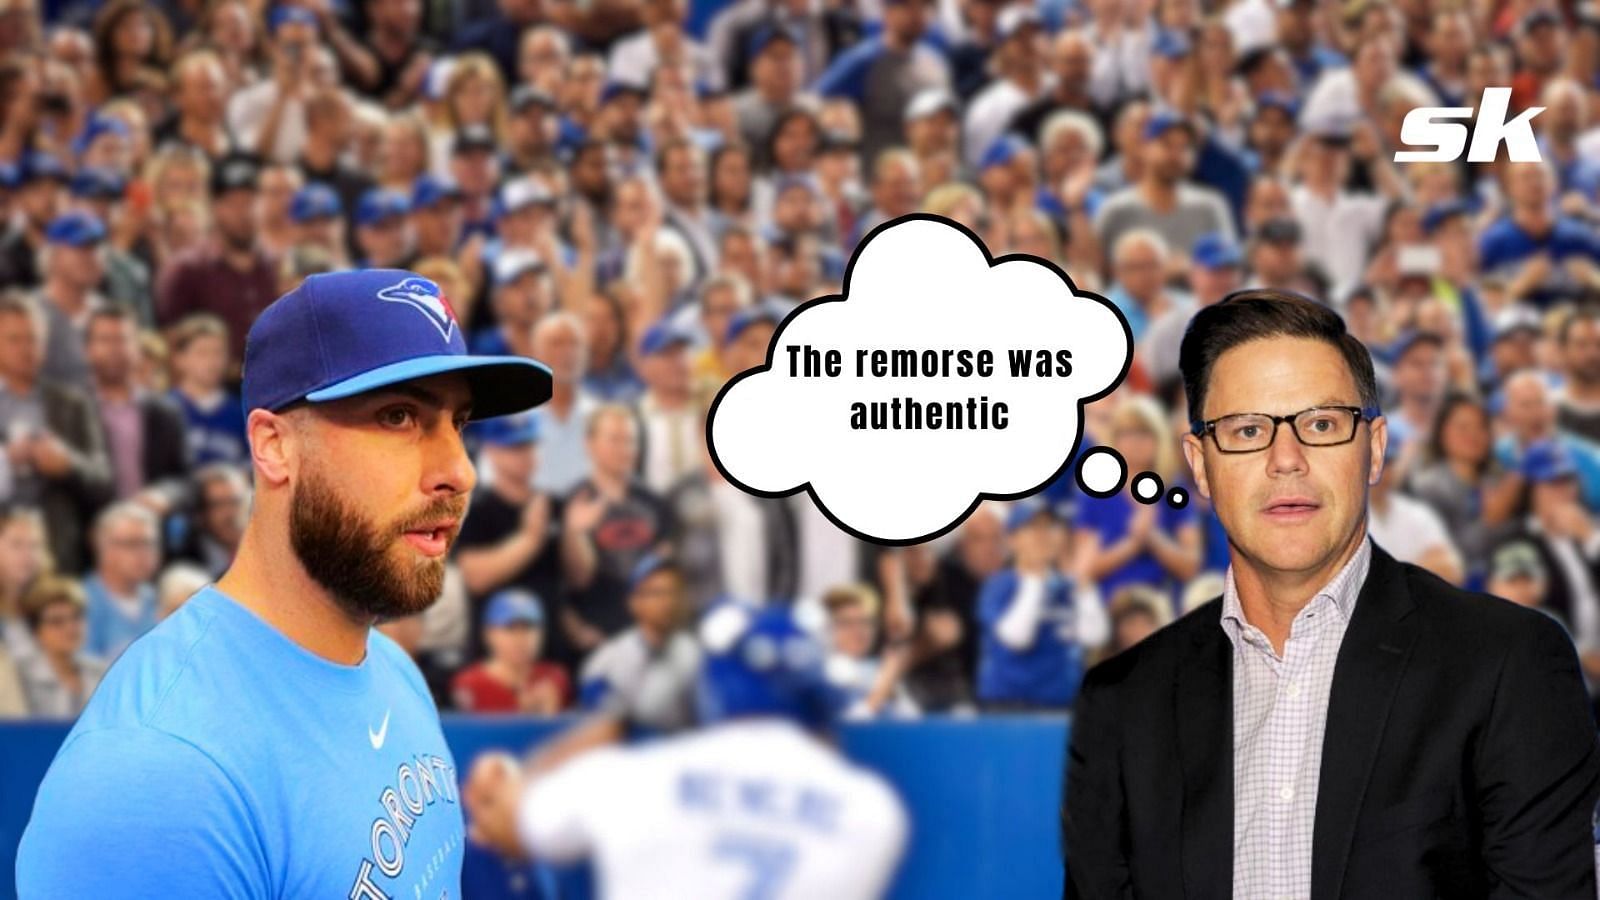 Toronto Blue Jays fans riled by team accepting pitcher Anthony Bass&rsquo; apology for inflammatory social media post